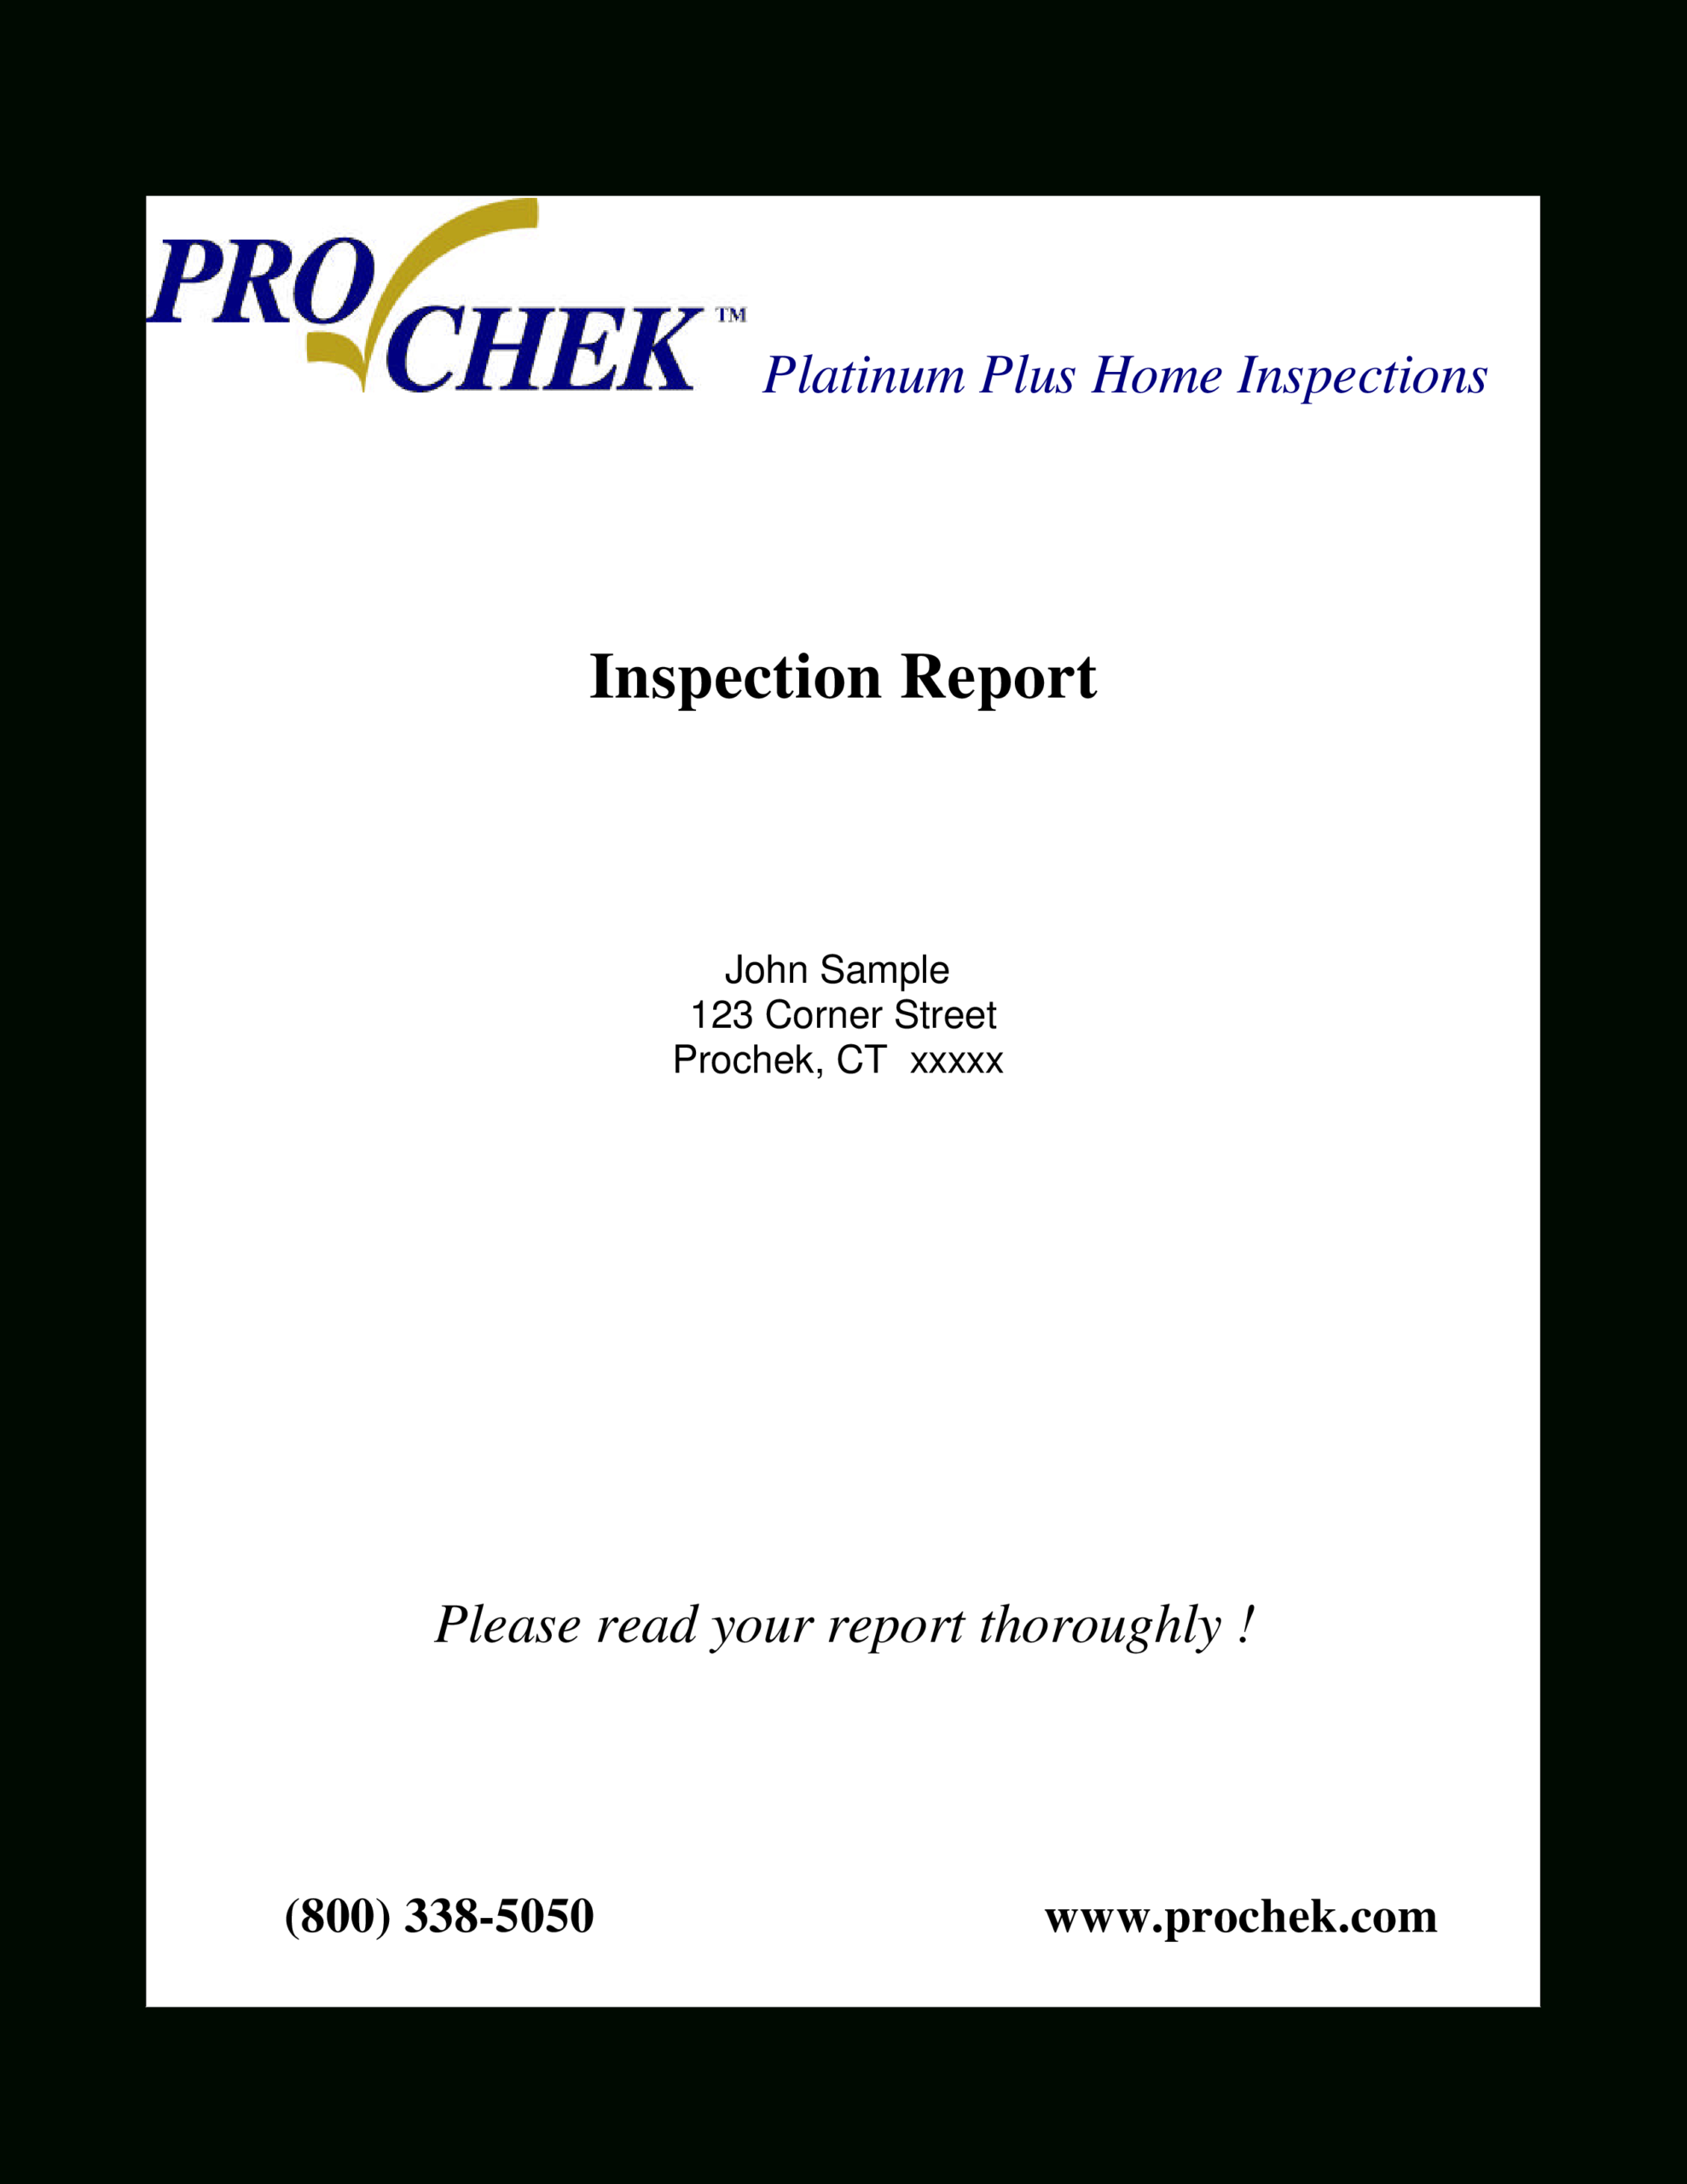 Home Inspection Report | Templates At Allbusinesstemplates Intended For Home Inspection Report Template